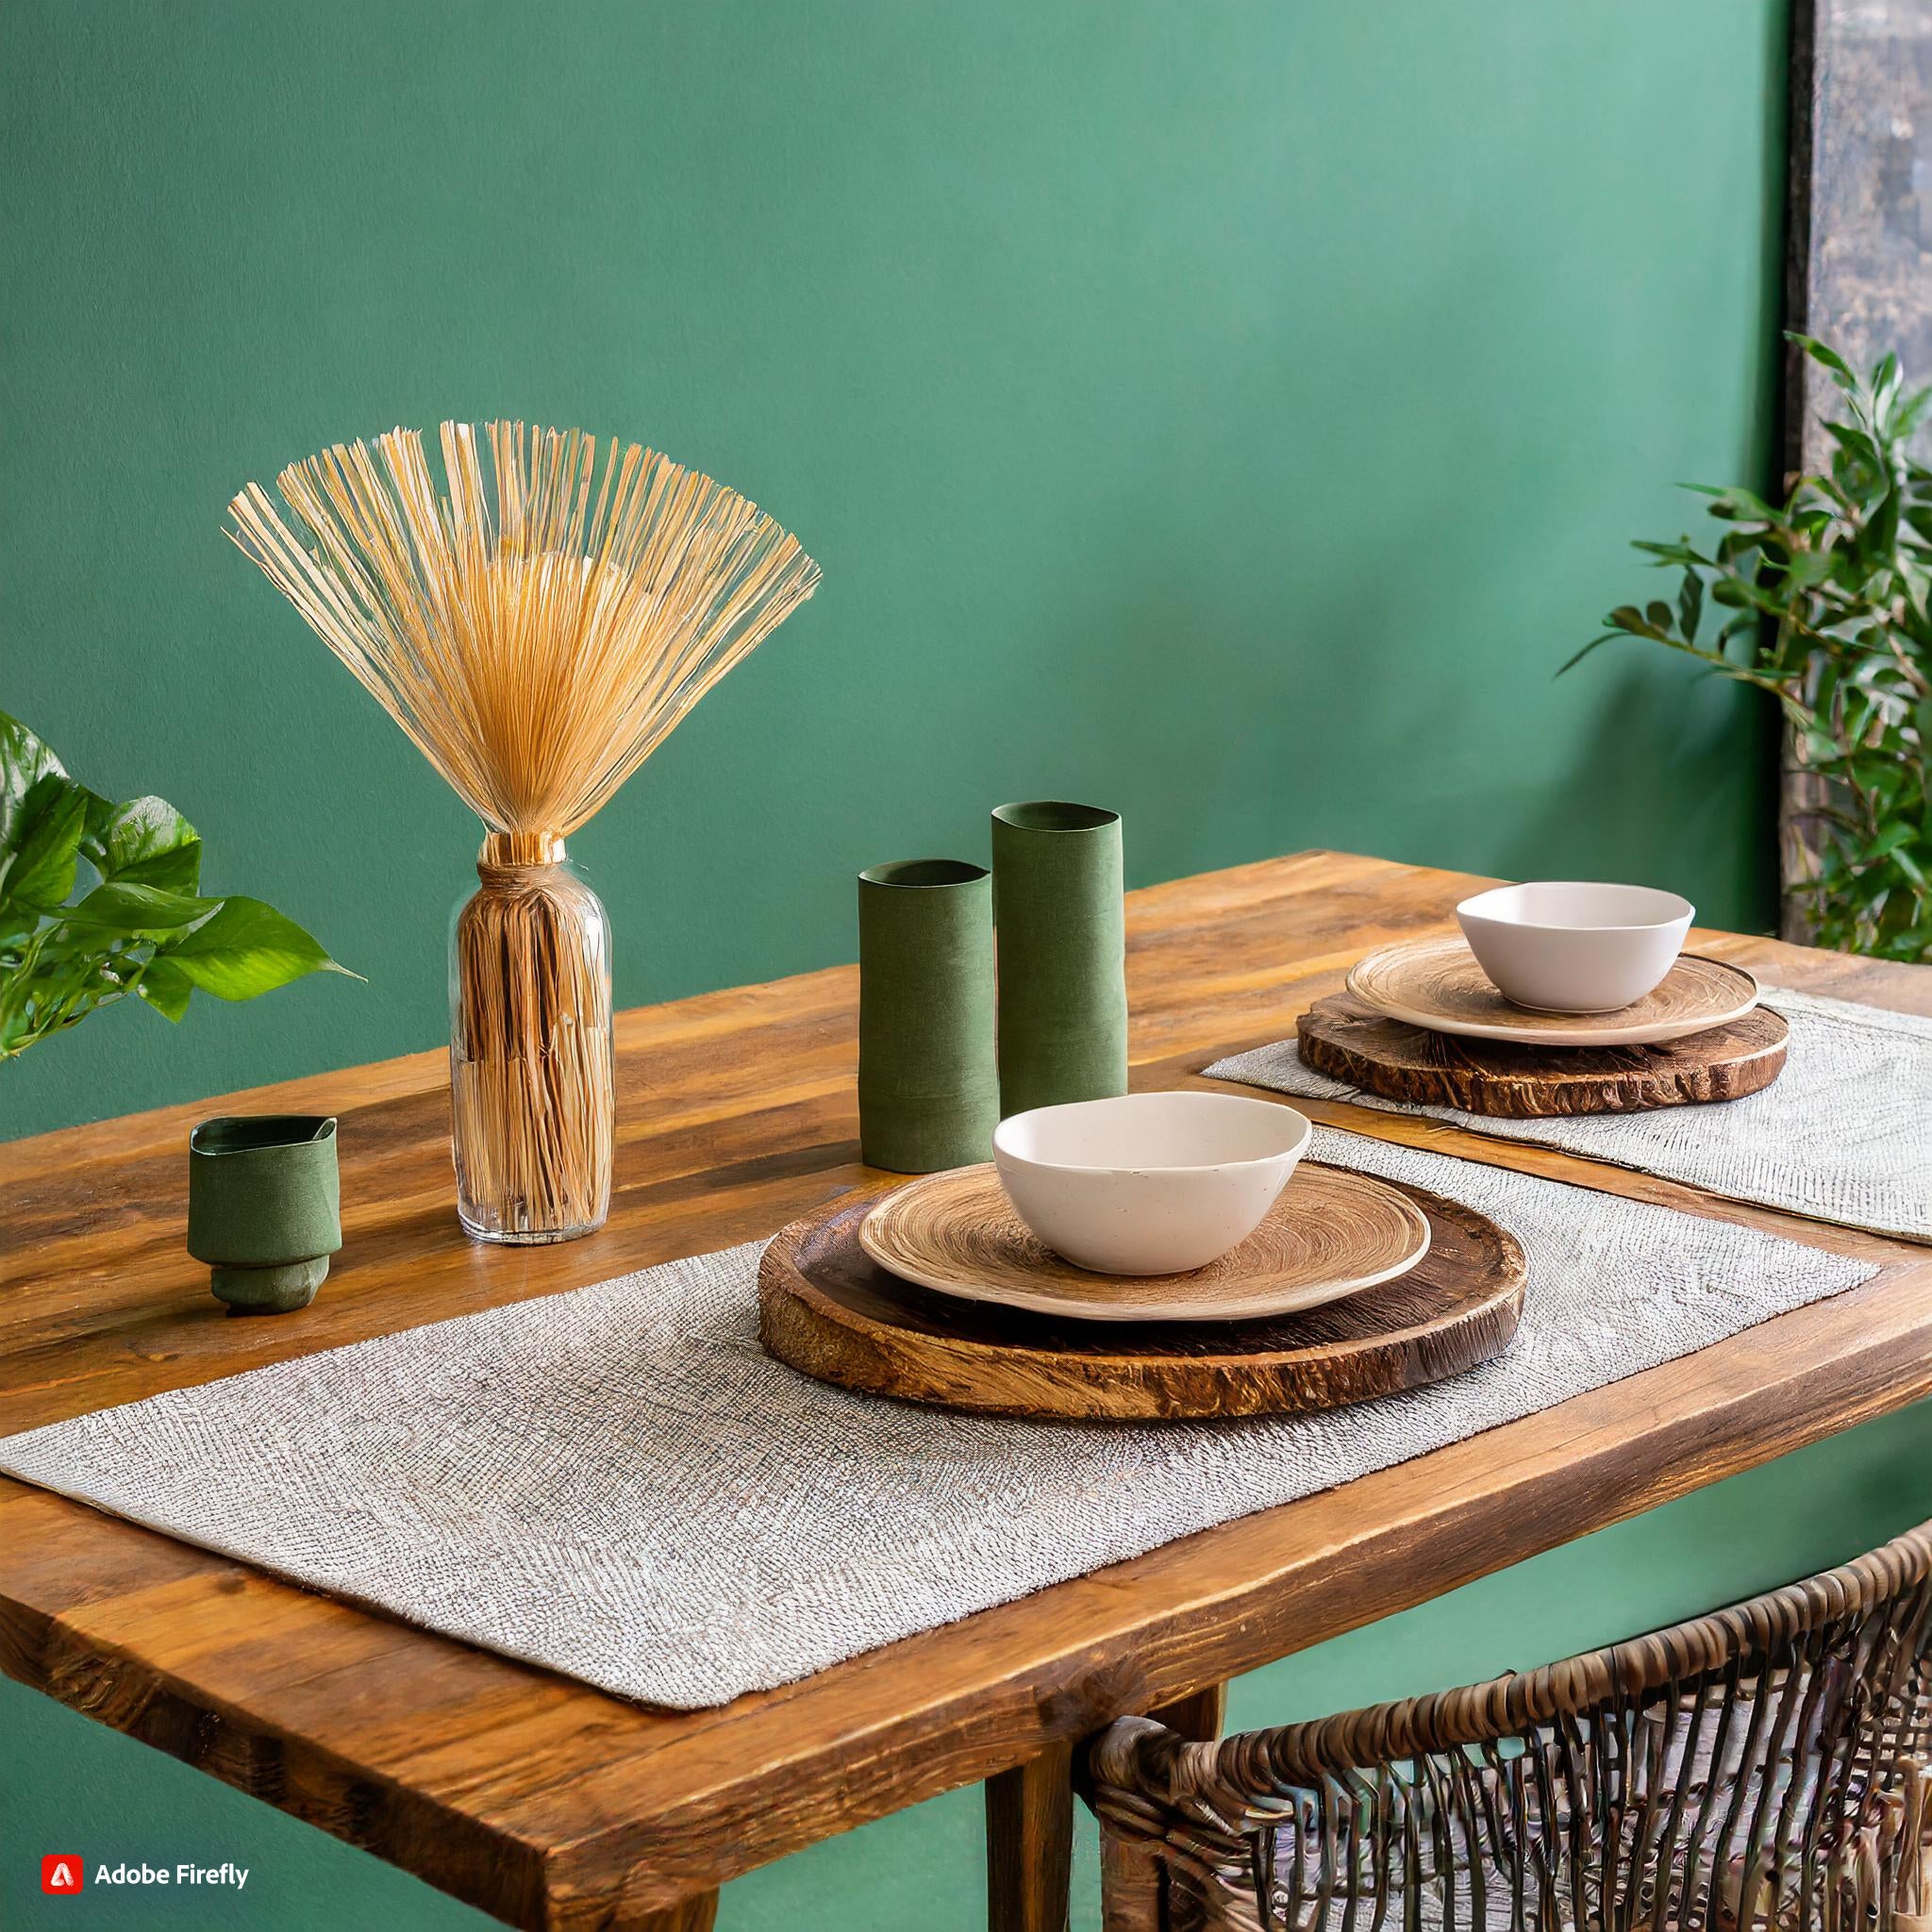 Beautify your space with Darido's handcrafted, elegant, and sustainable decor pieces.